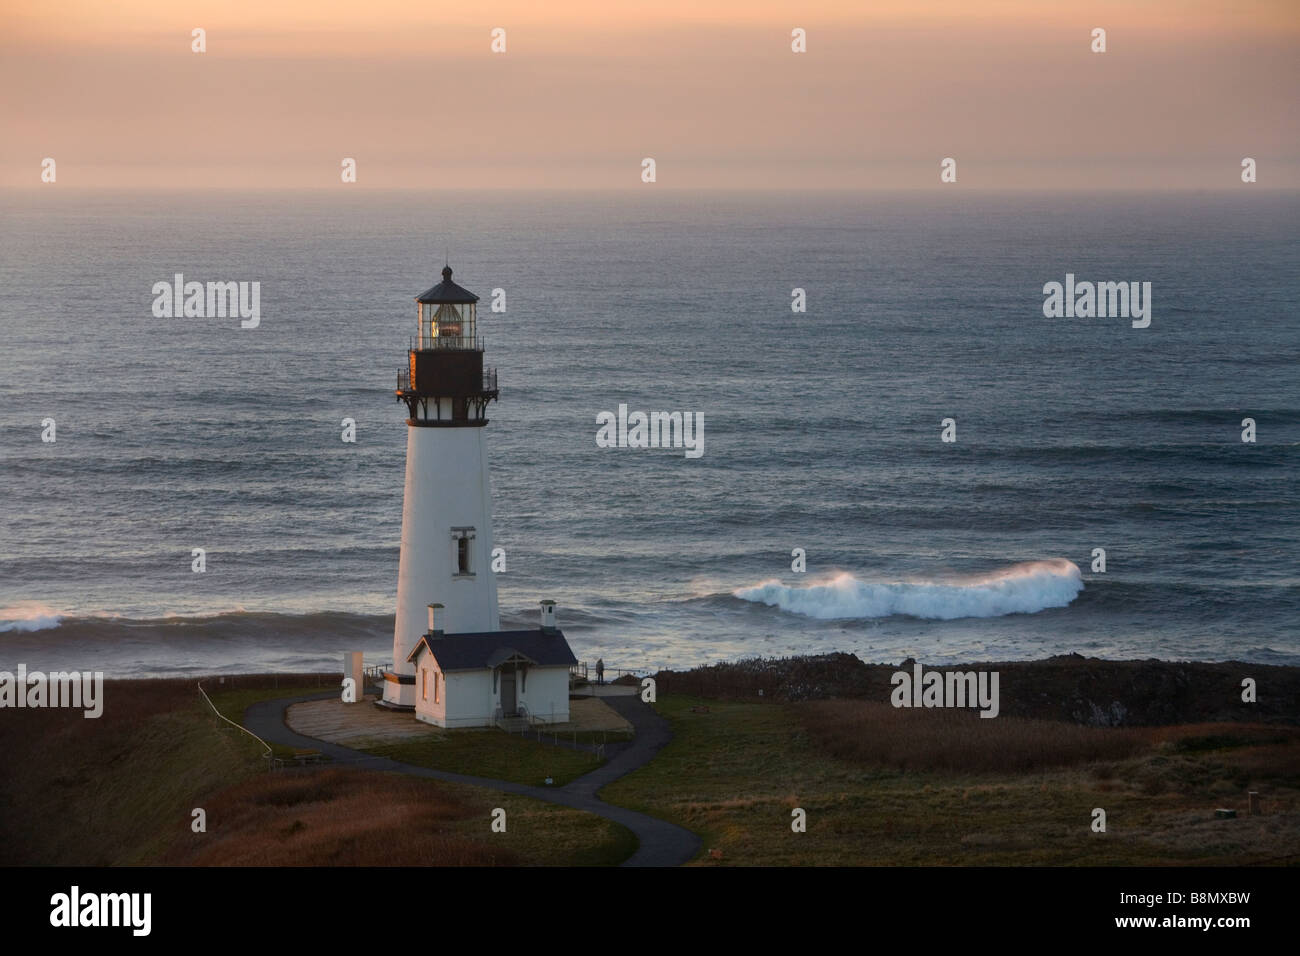 Yaquina Head Lighthouse Banque D'Images